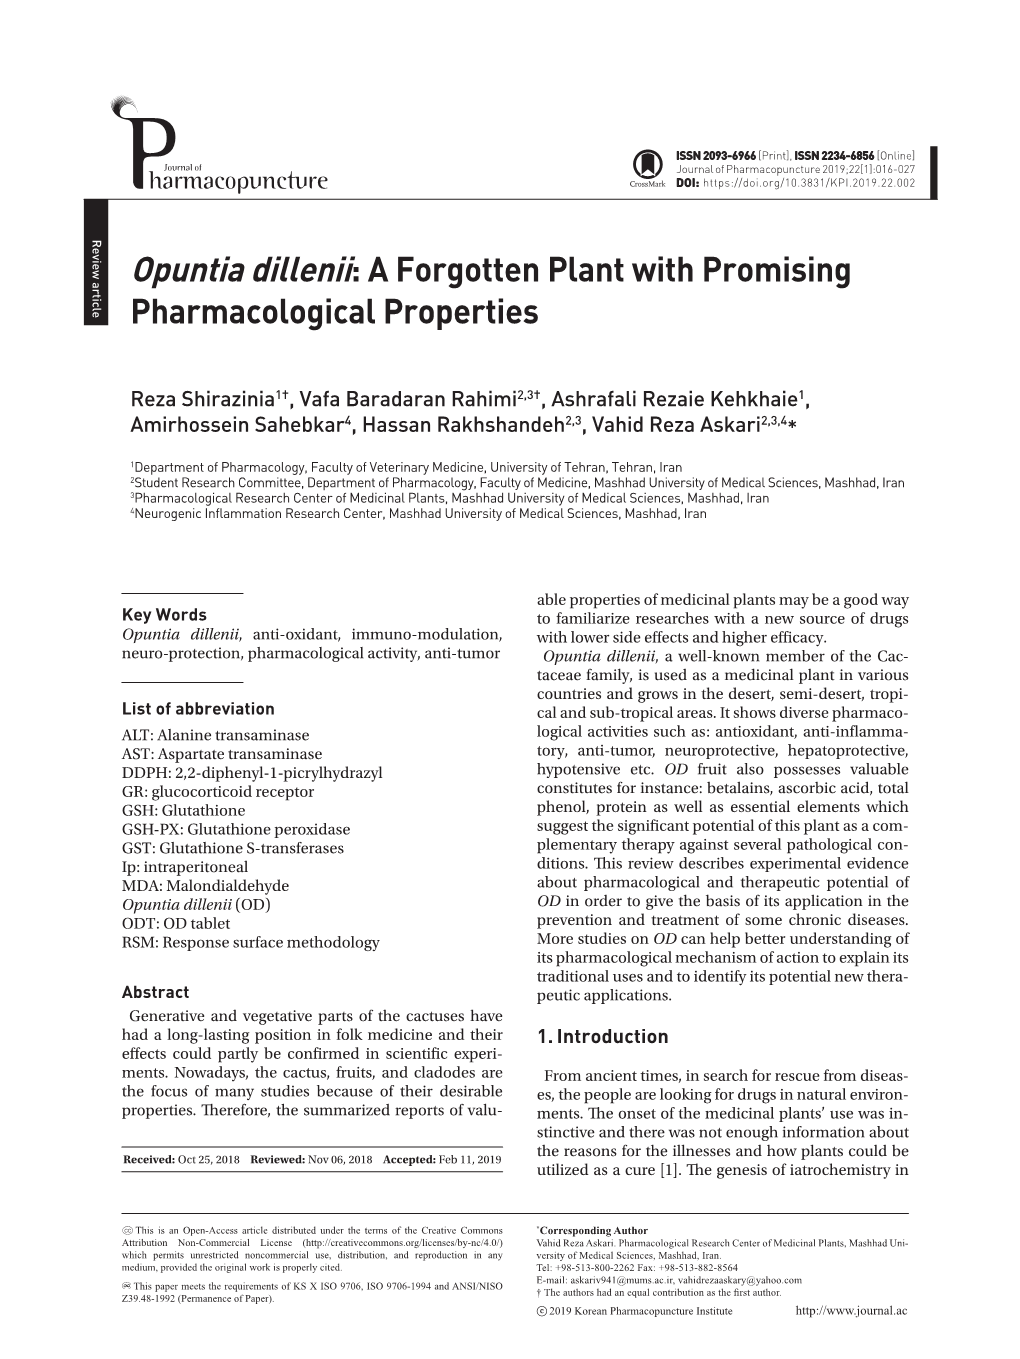 Opuntia Dillenii: a Forgotten Plant with Promising Pharmacological Properties